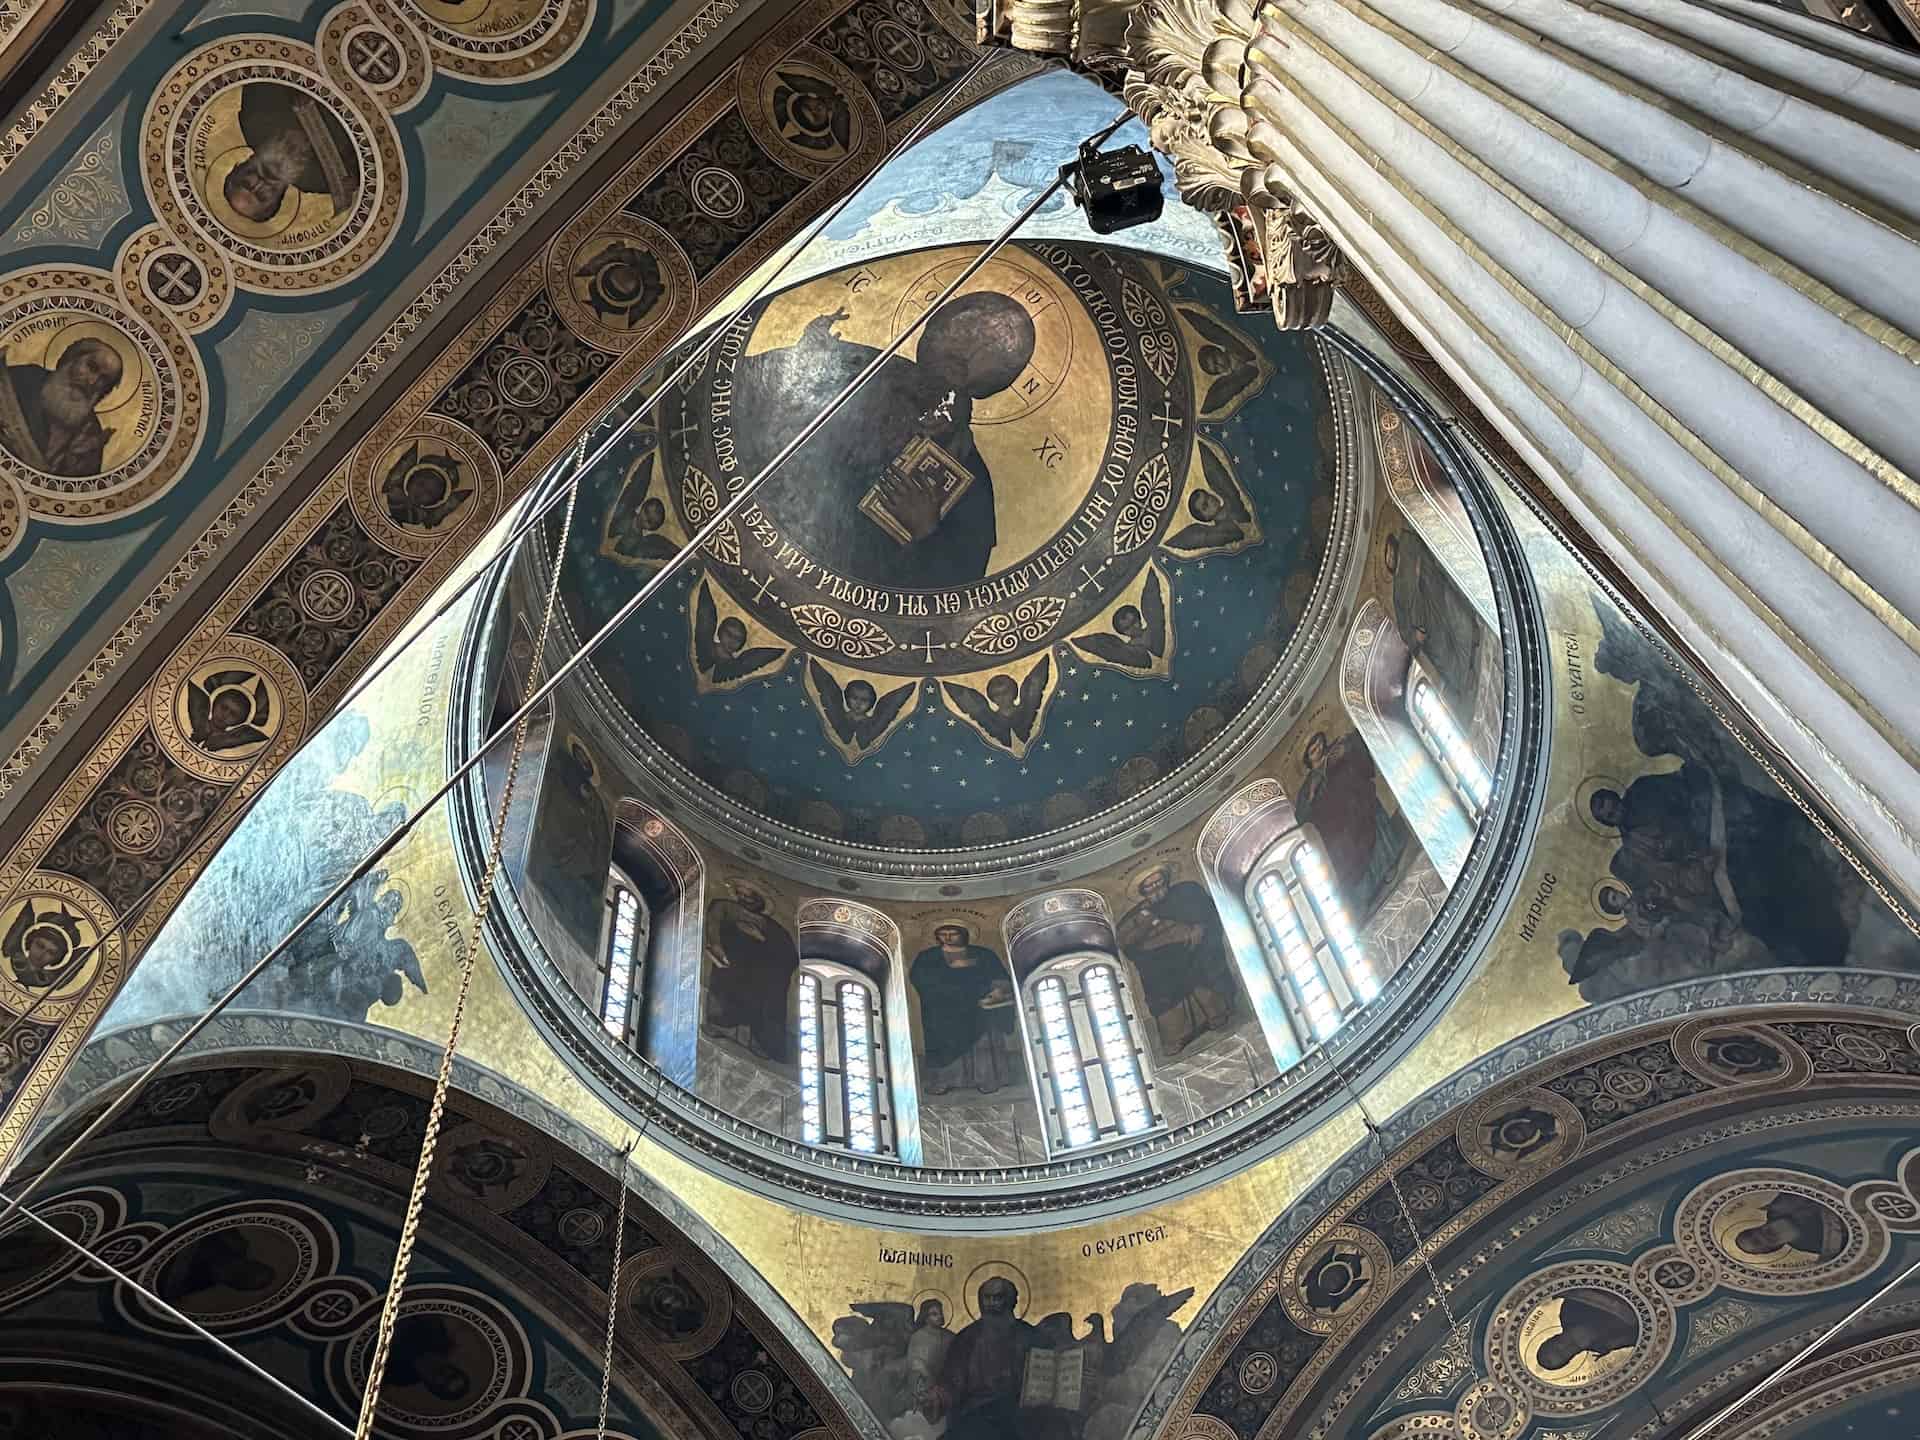 Dome of Panagia Chrysospileotissa in the Historic Center of Athens, Greece